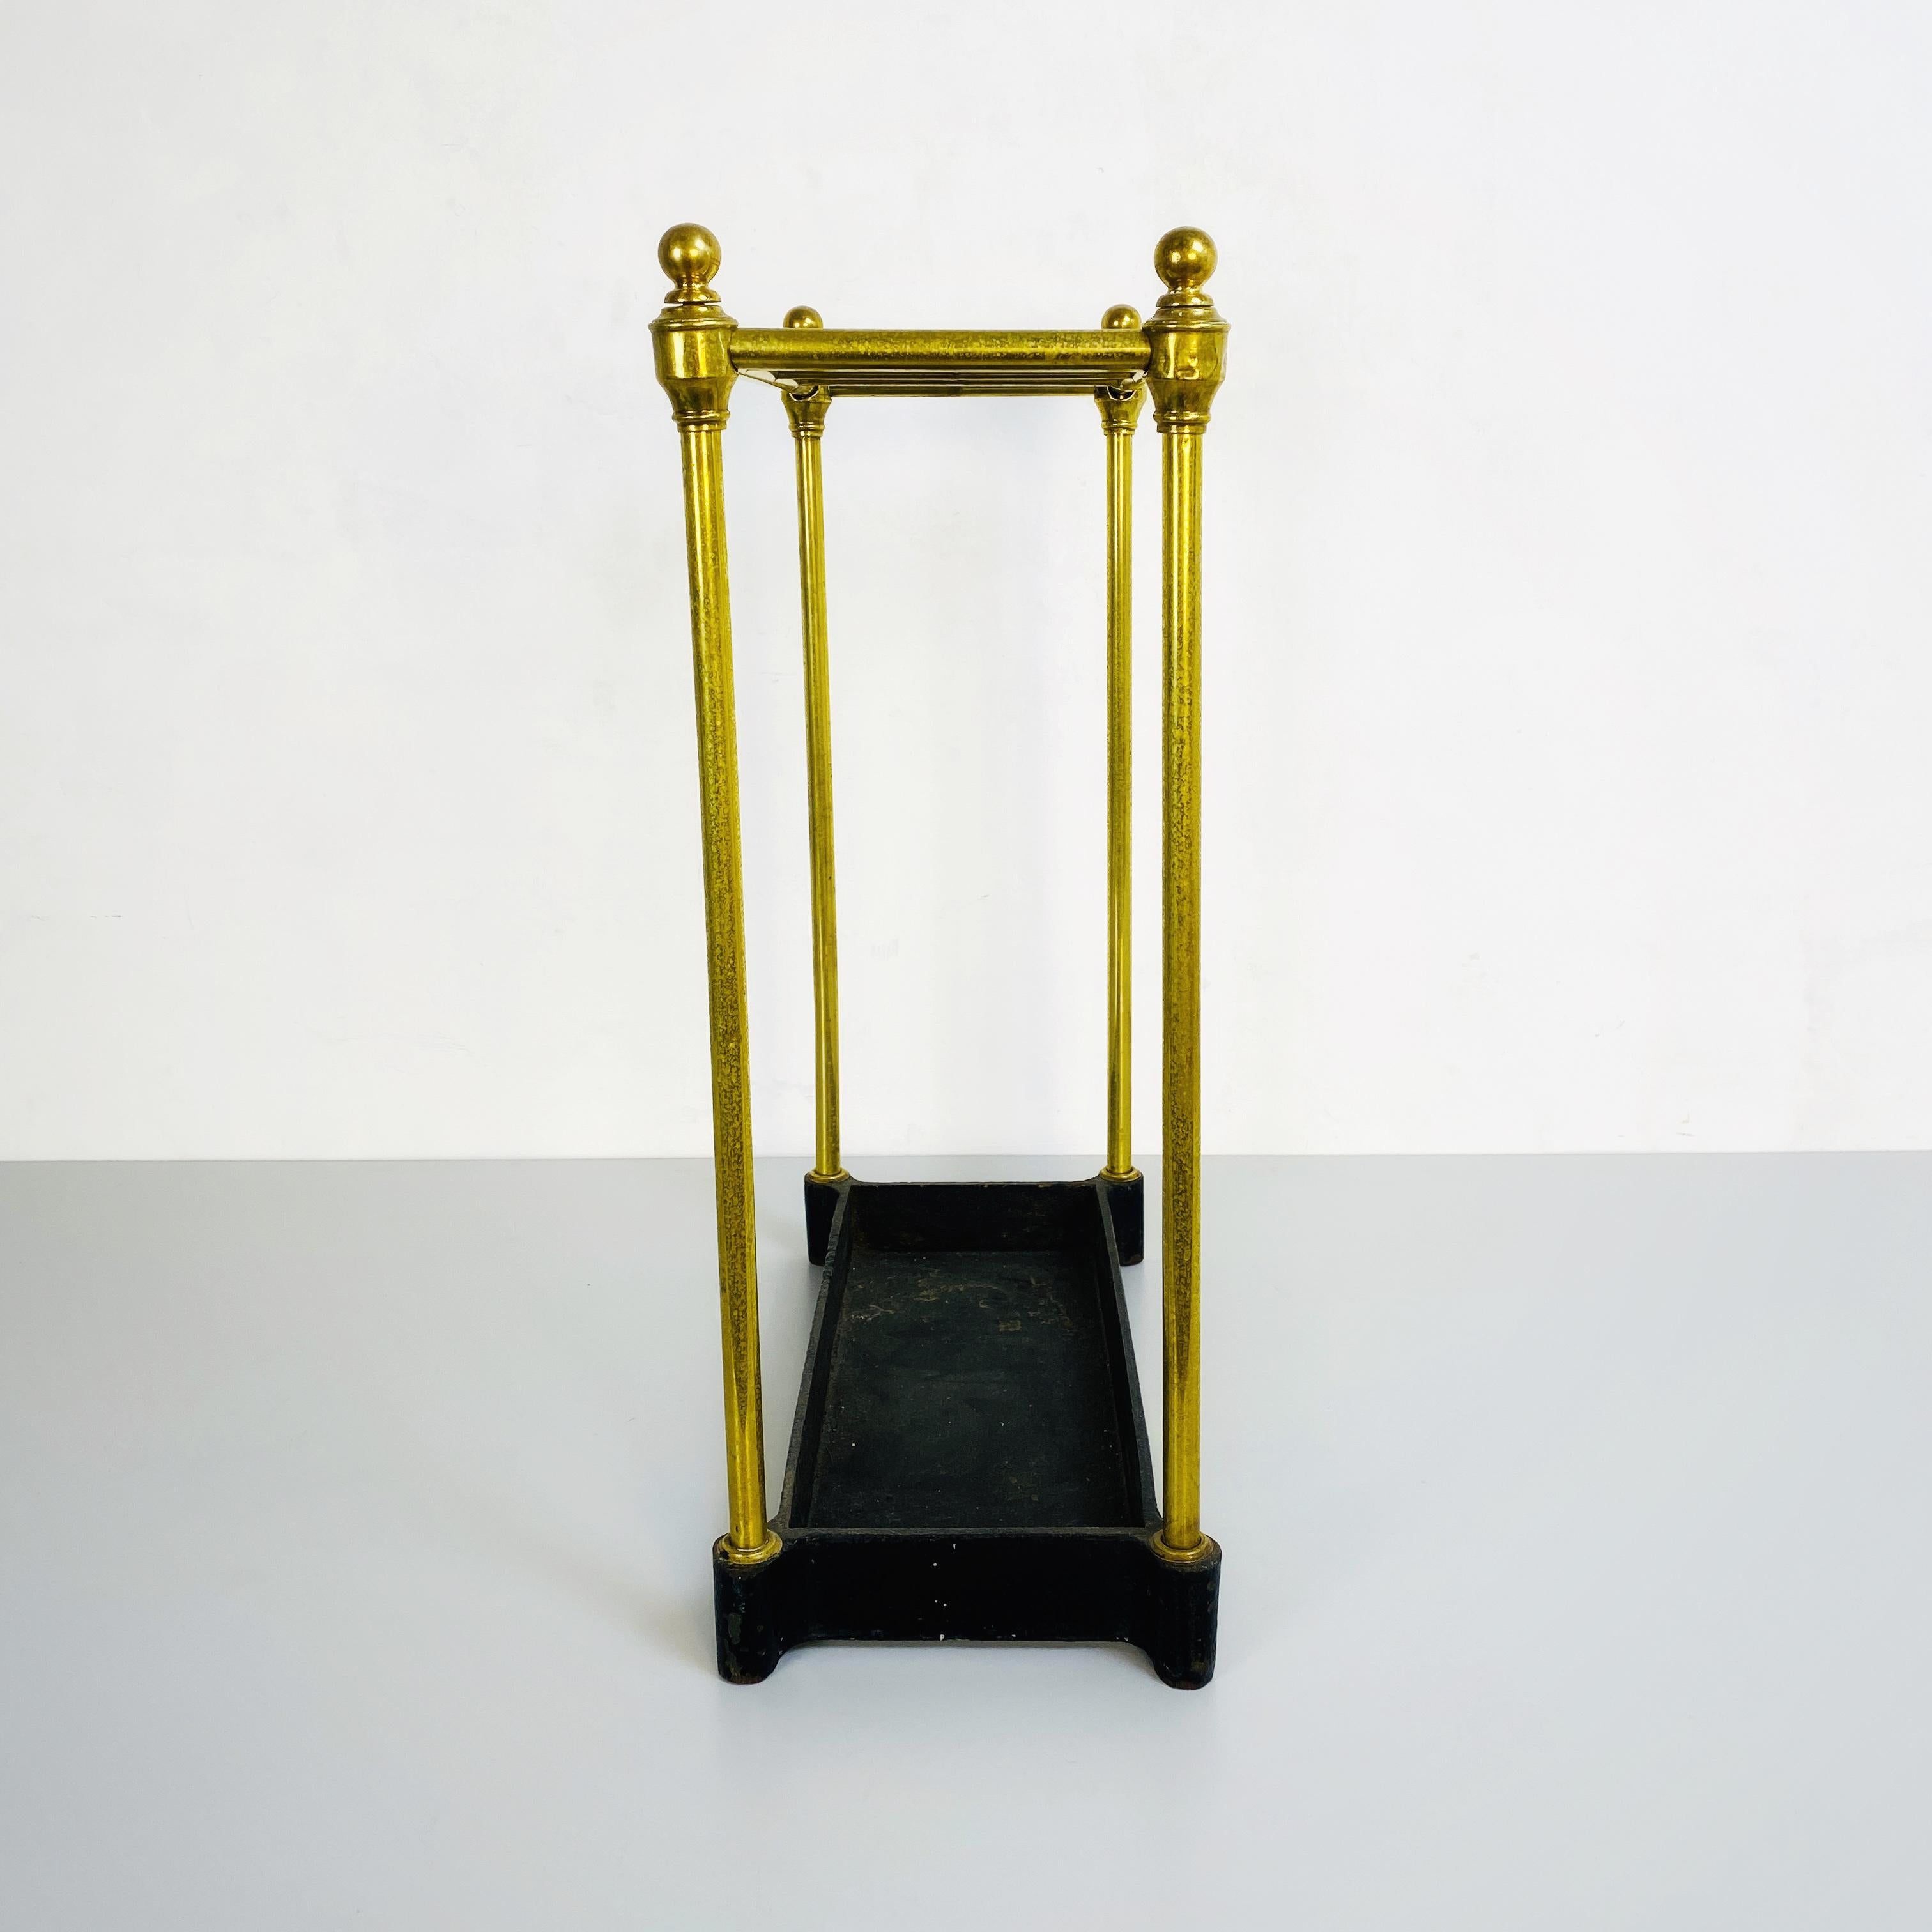 Italian Mid-Century Brass Umbrella Stand with Black Iron Base, 1950s For Sale 2